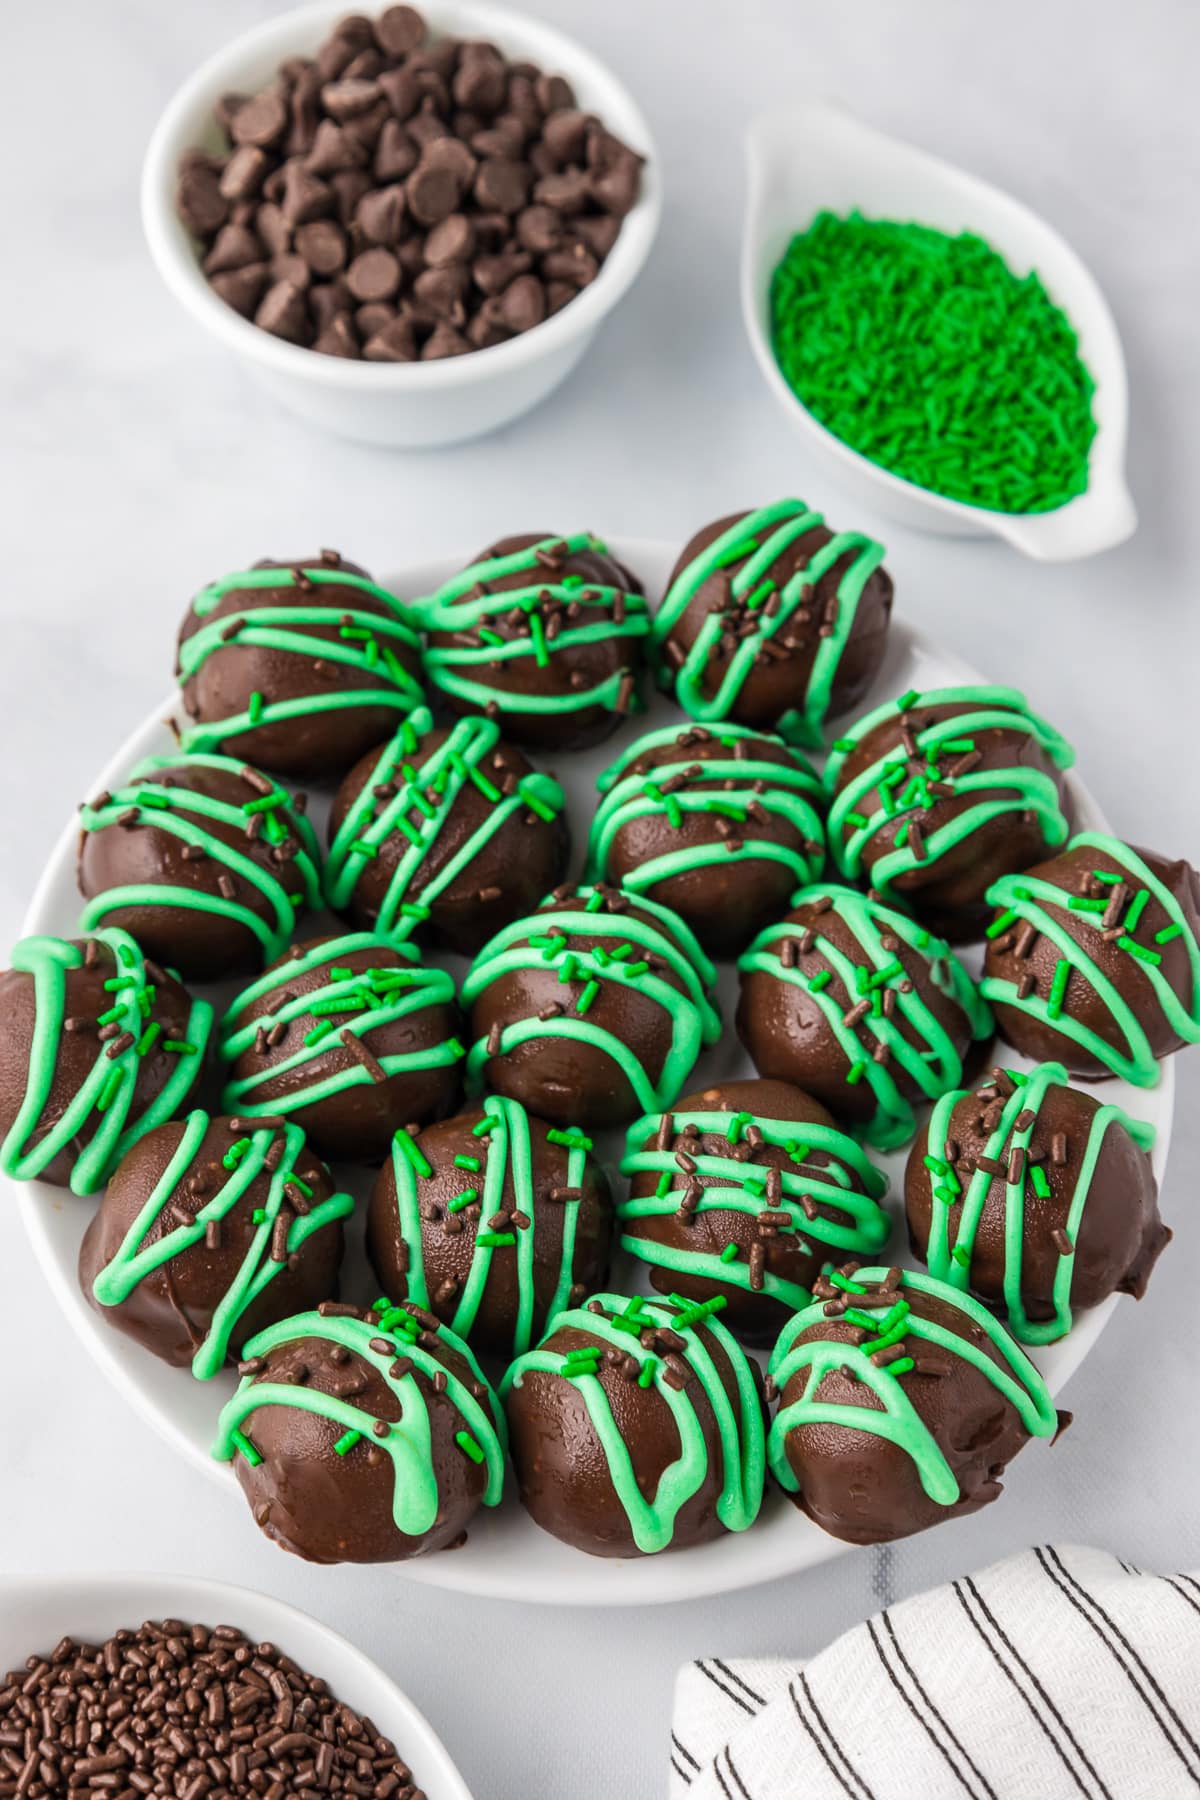 Mint chocolate truffles piled on a plate from overhead with green drizzled chocolate and sprinkles.